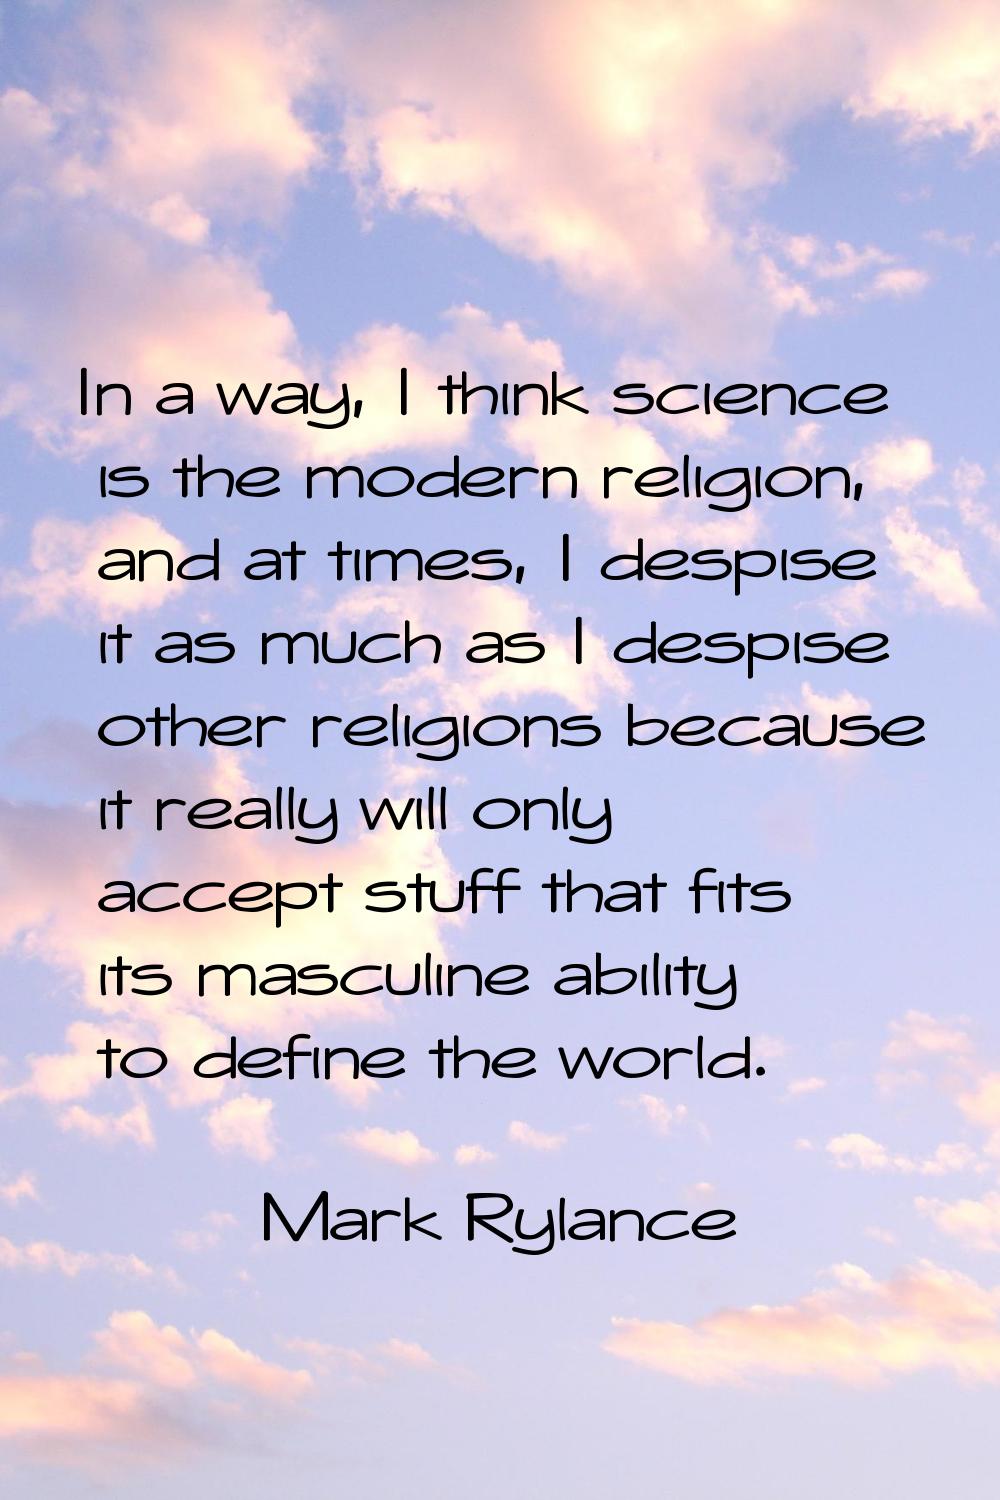 In a way, I think science is the modern religion, and at times, I despise it as much as I despise o